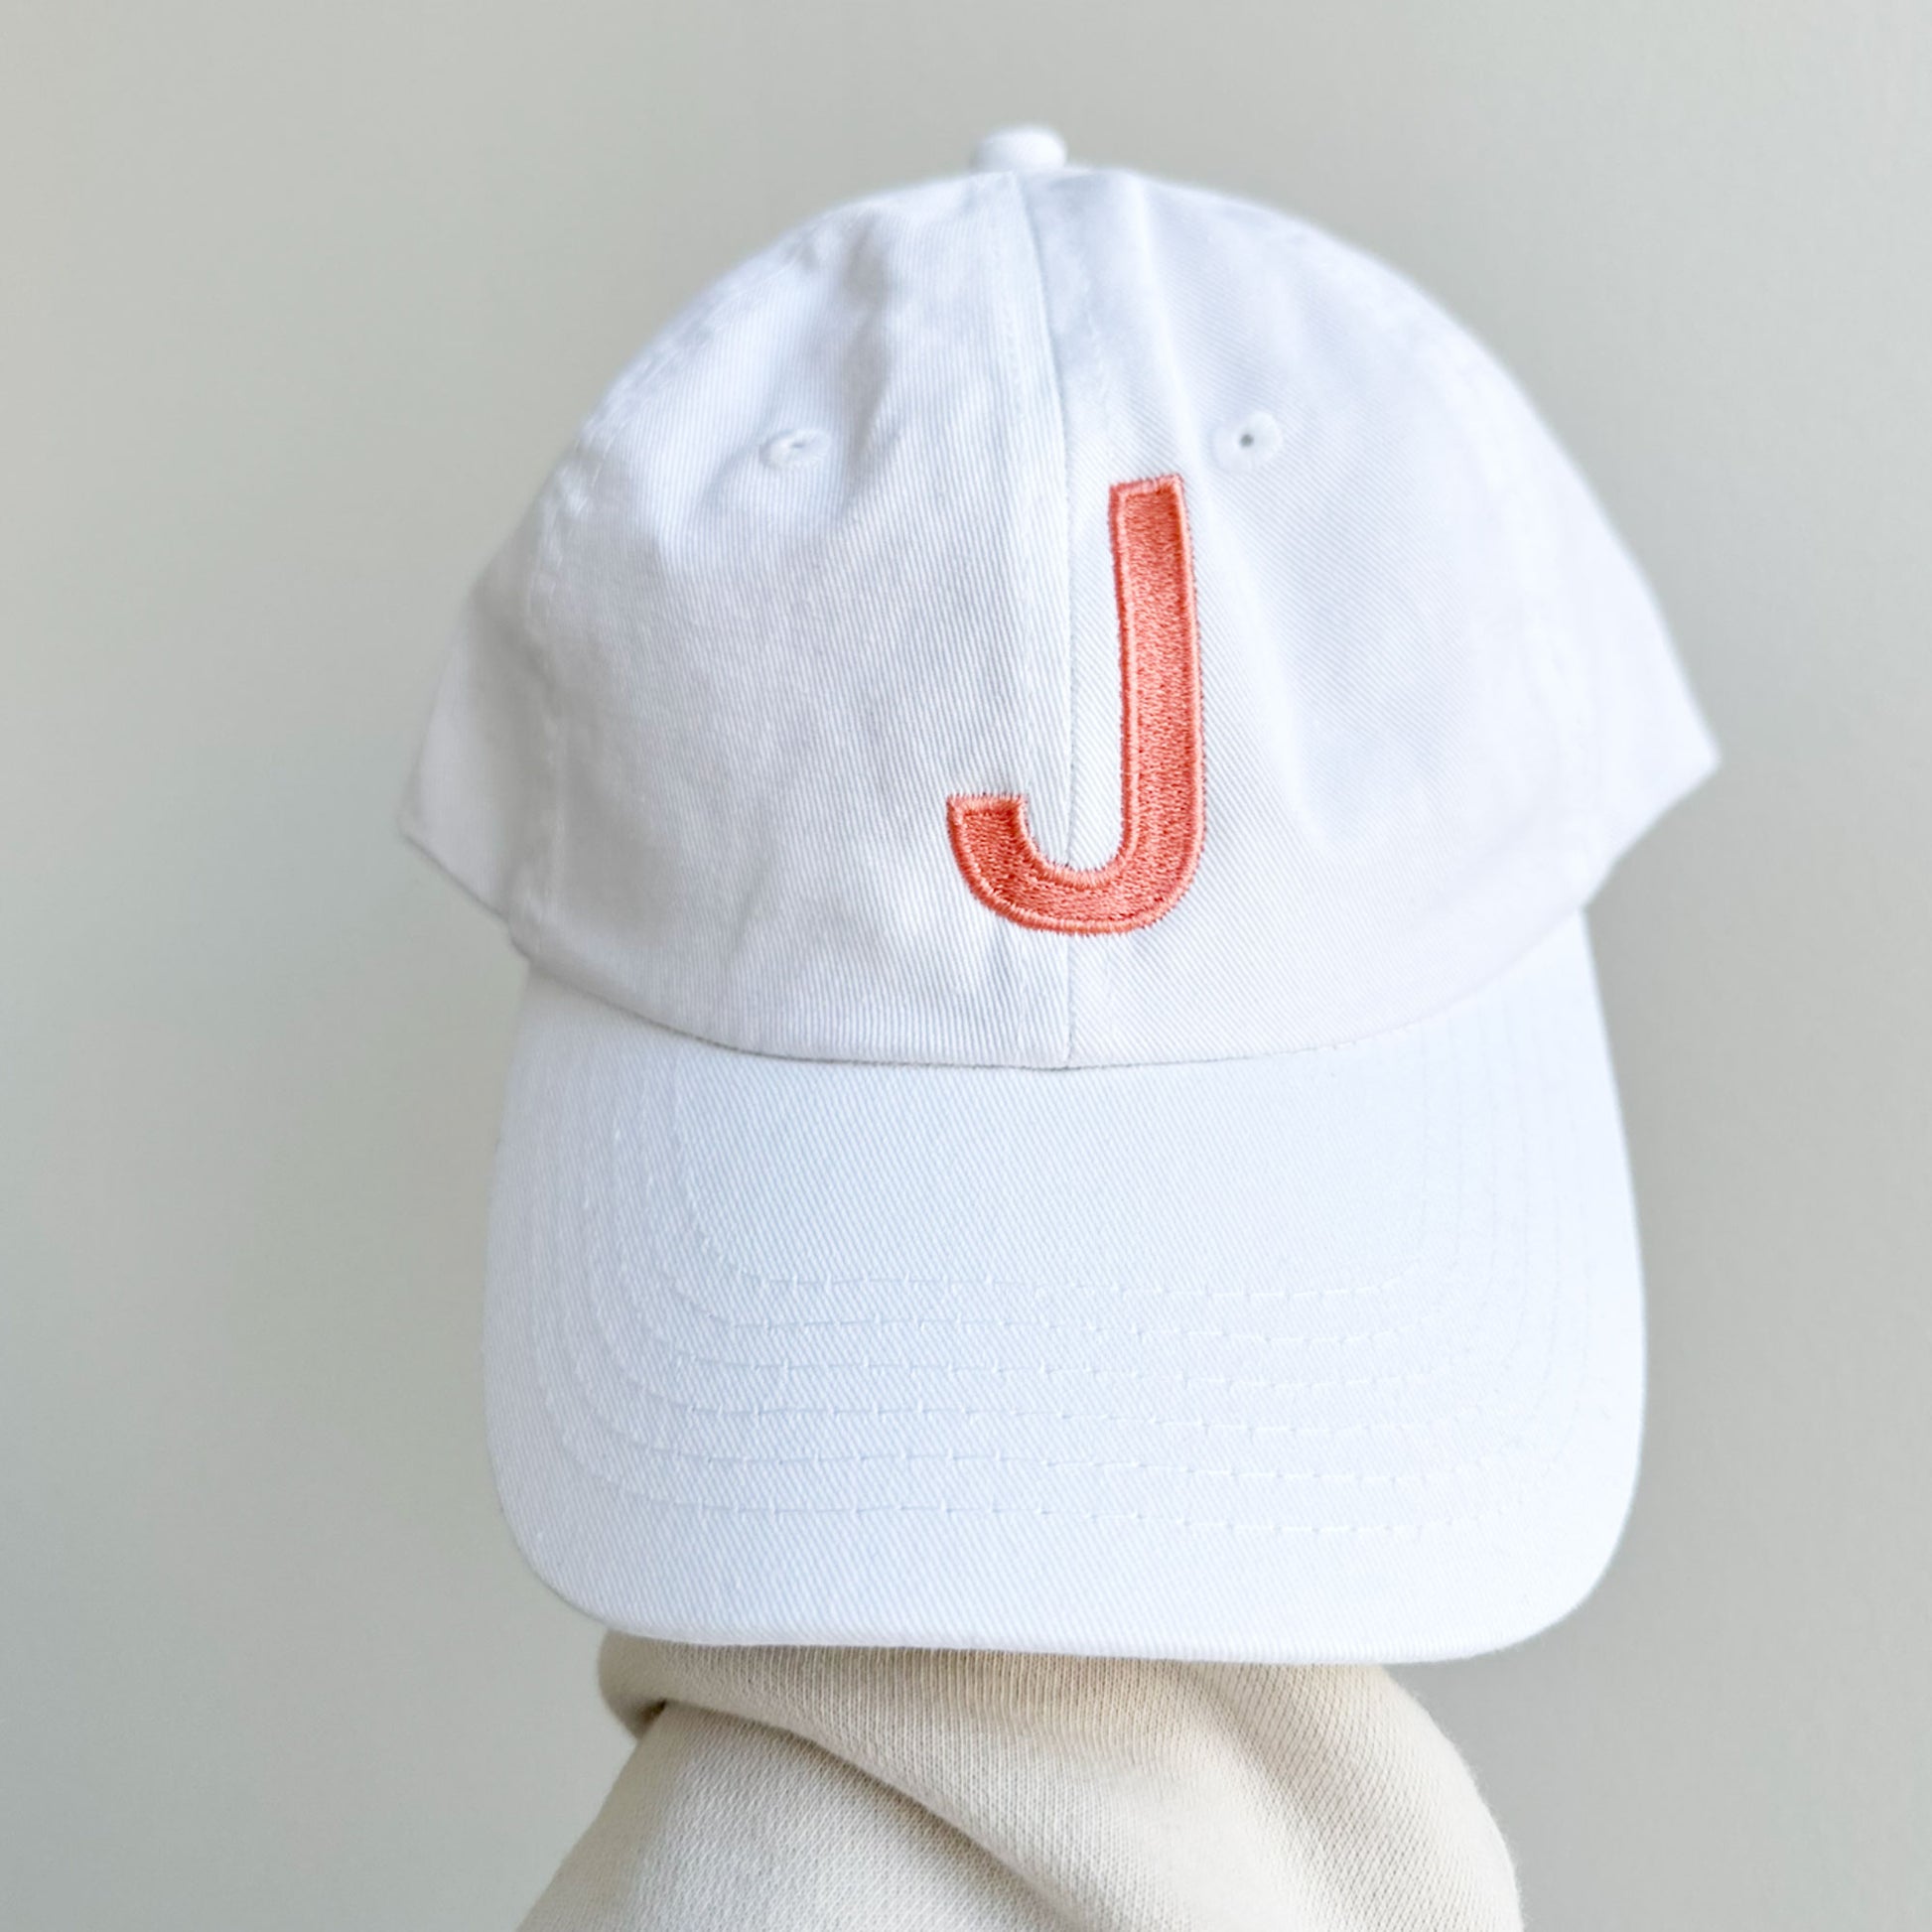 white baseball cap with a custom initial embroidery in papaya colored thread